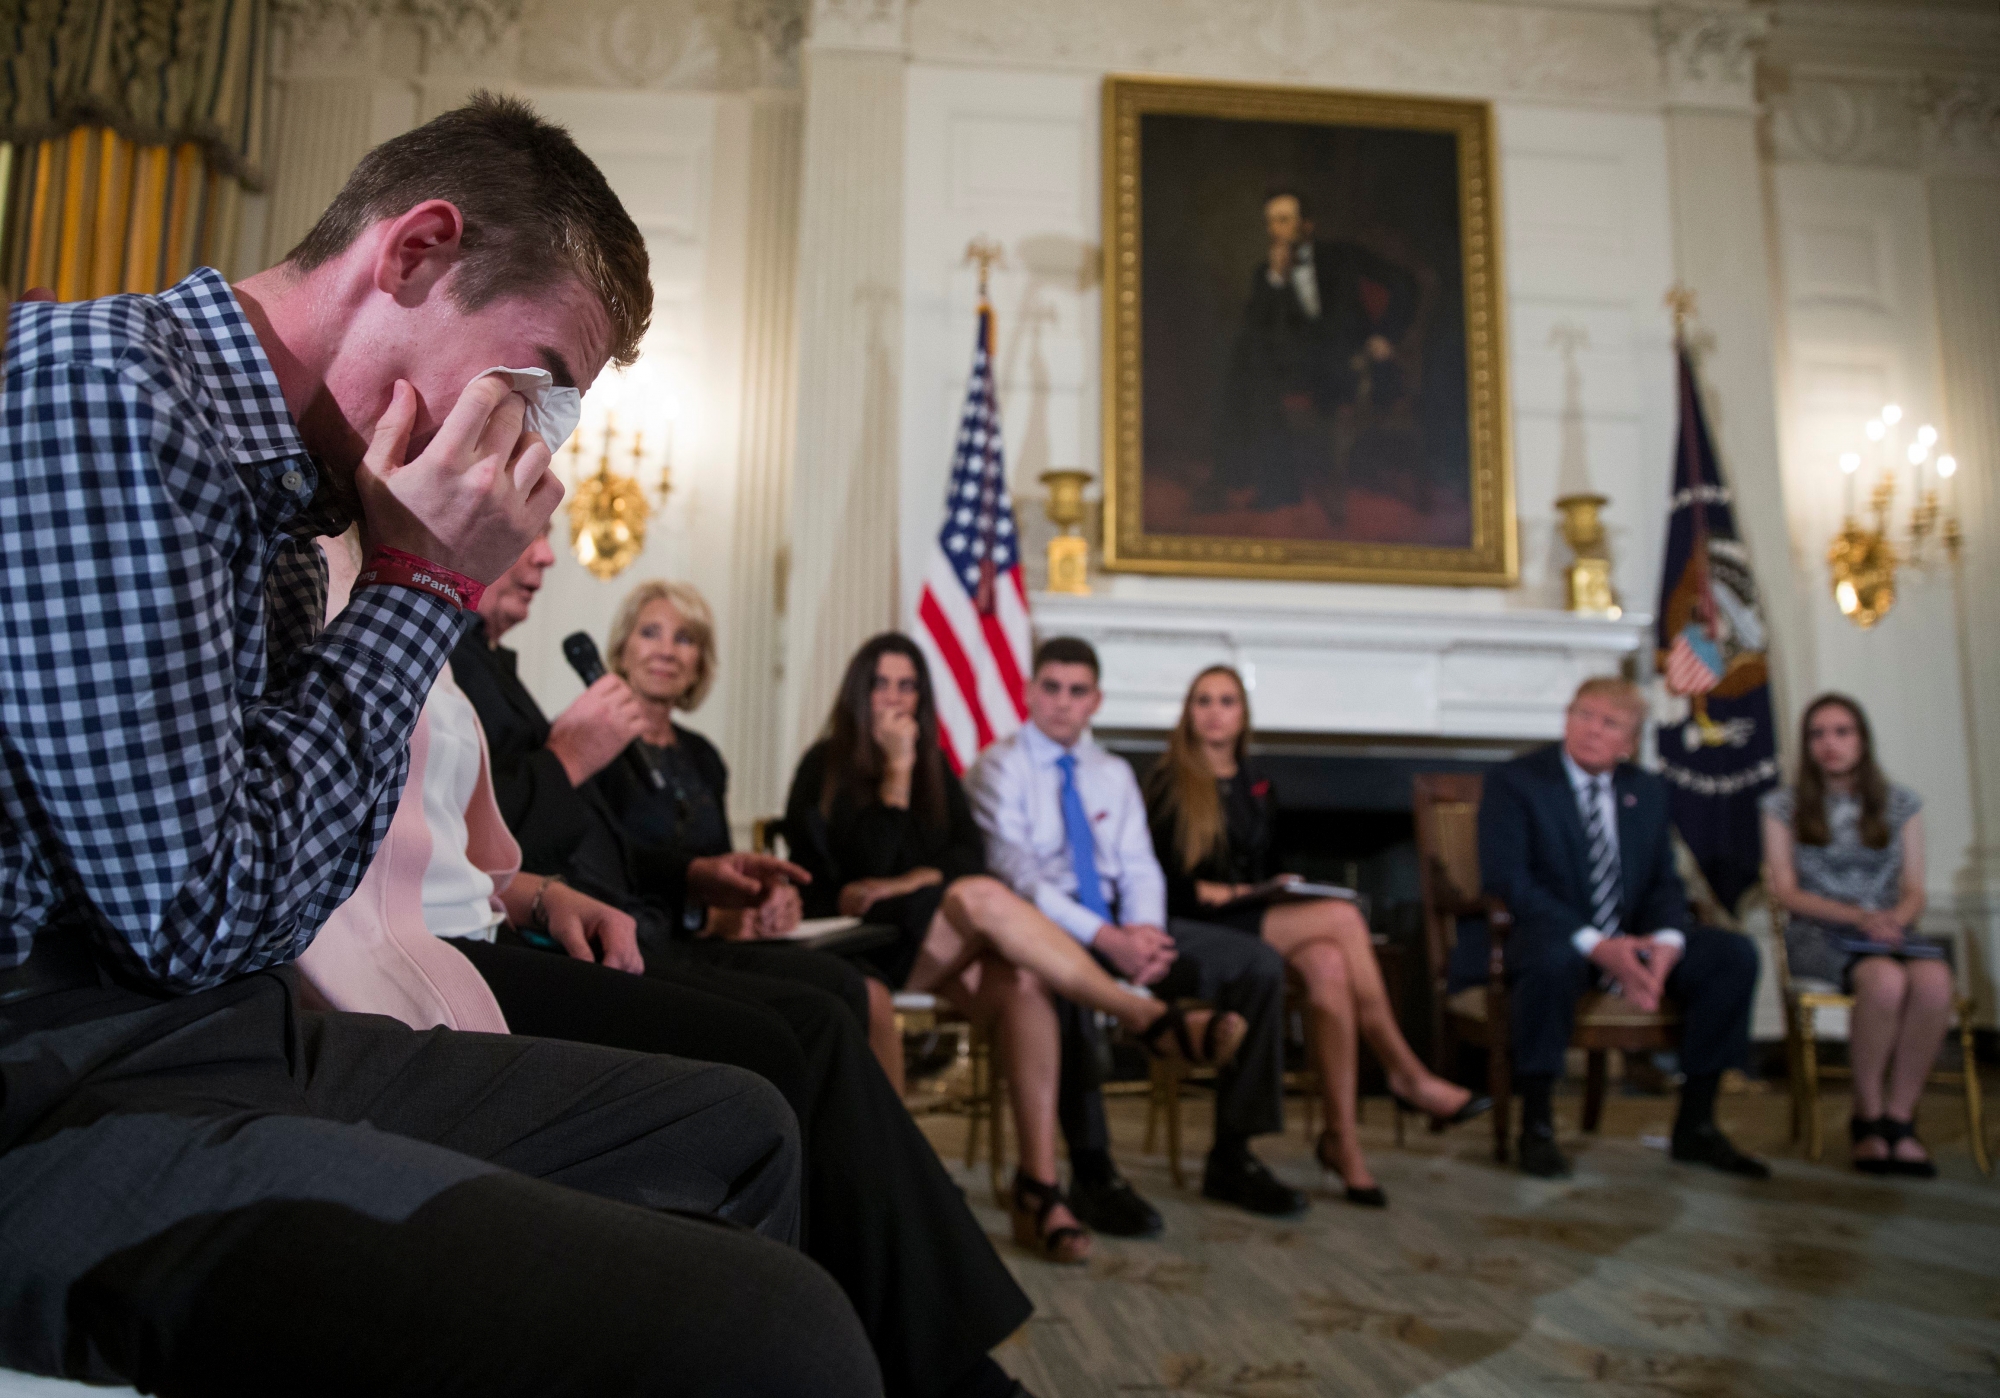 epa06551639 Marjory Stoneman Douglas High School shooting survivor Samuel Zeif (L) cries after delivering remarks as US President Donald J. Trump listens during a listening session with high school students and teachers in the State Dining Room of the White House in Washington, DC, USA, 21 February 2018. Families from the Parkland, Newtown and Columbine communities attended the meeting.  EPA/SHAWN THEW USA TRUMP GUN CONTROL